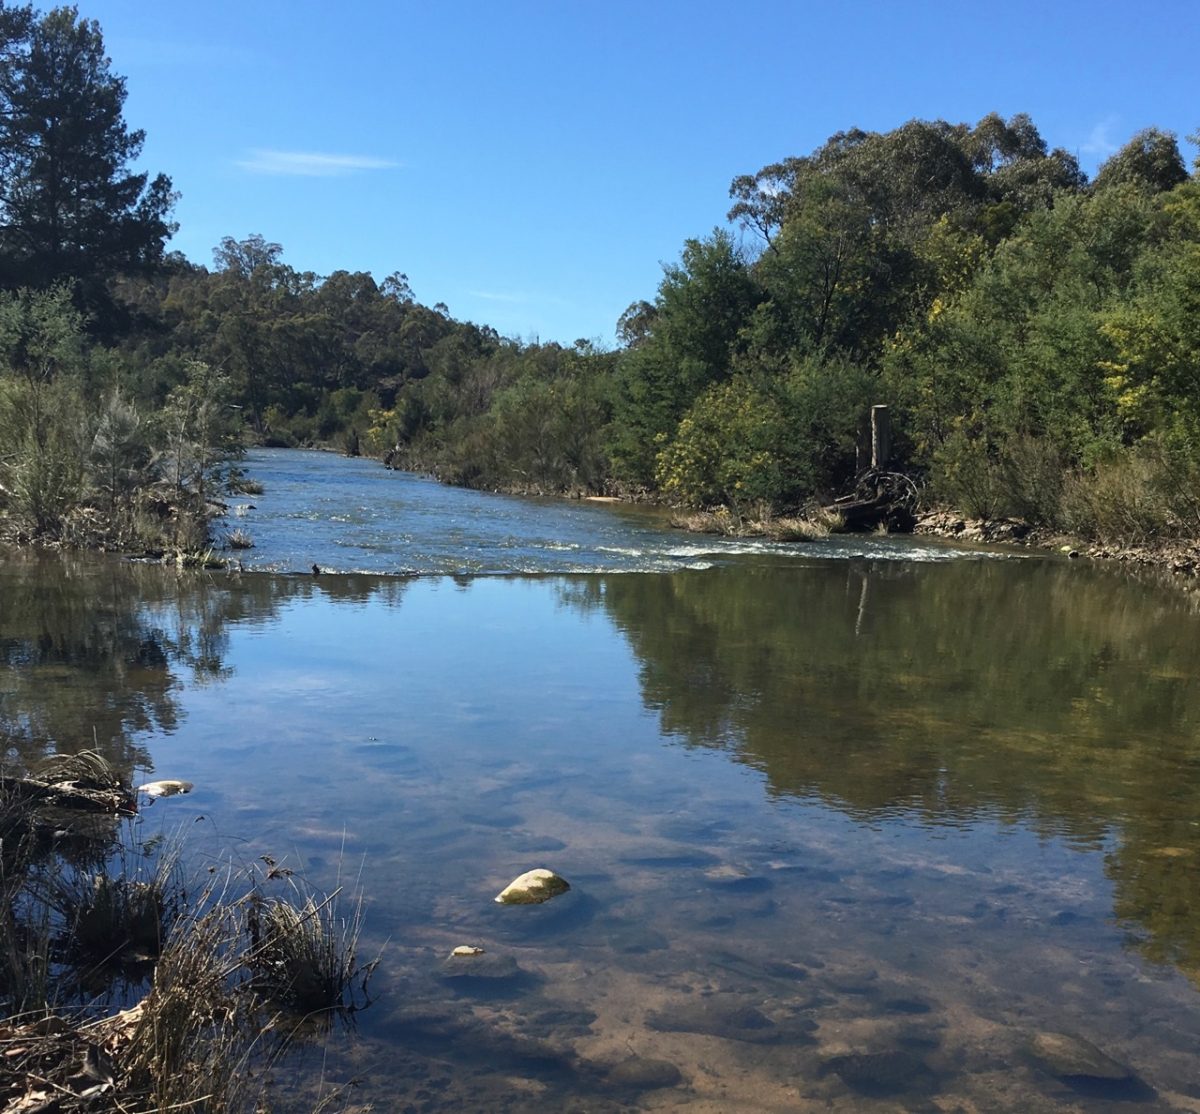 Cotter River, showing trees on the bank, clear water and reflections trees and the sky in the water.